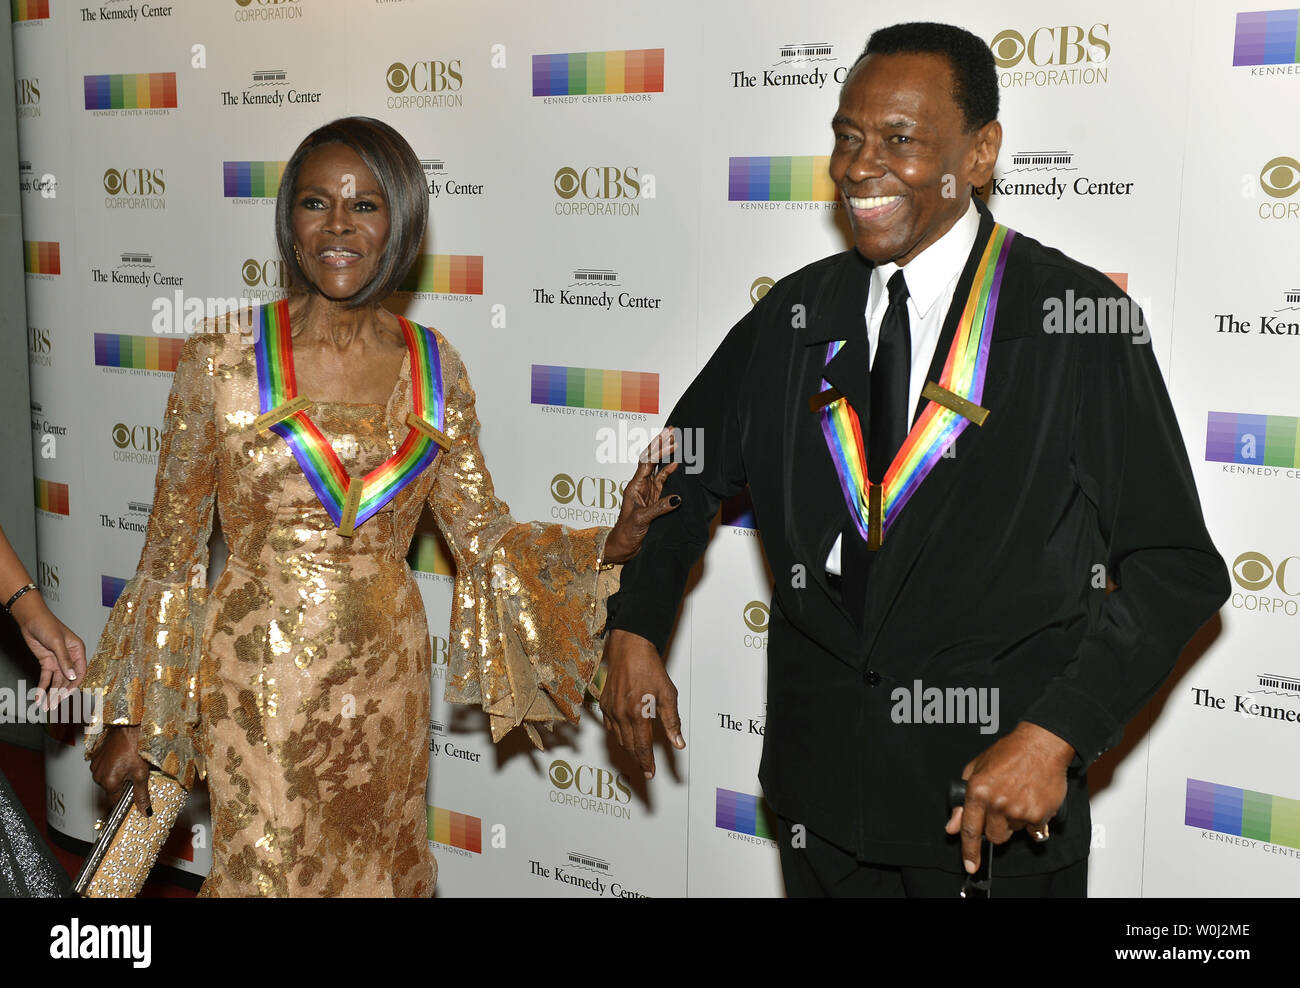 2015 Kennedy Center Honoree actress and Broadway star Cicely Tyson (L) and dancer Arthur Mitchell pose for photographers on the red carpet as they arrive for an evening of gala entertainment at the Kennedy Center, December 6, 2015, in Washington, DC.  The Honors are bestowed annually on five artists for their lifetime achievement in the arts and culture.    UPI/Mike Theiler Stock Photo